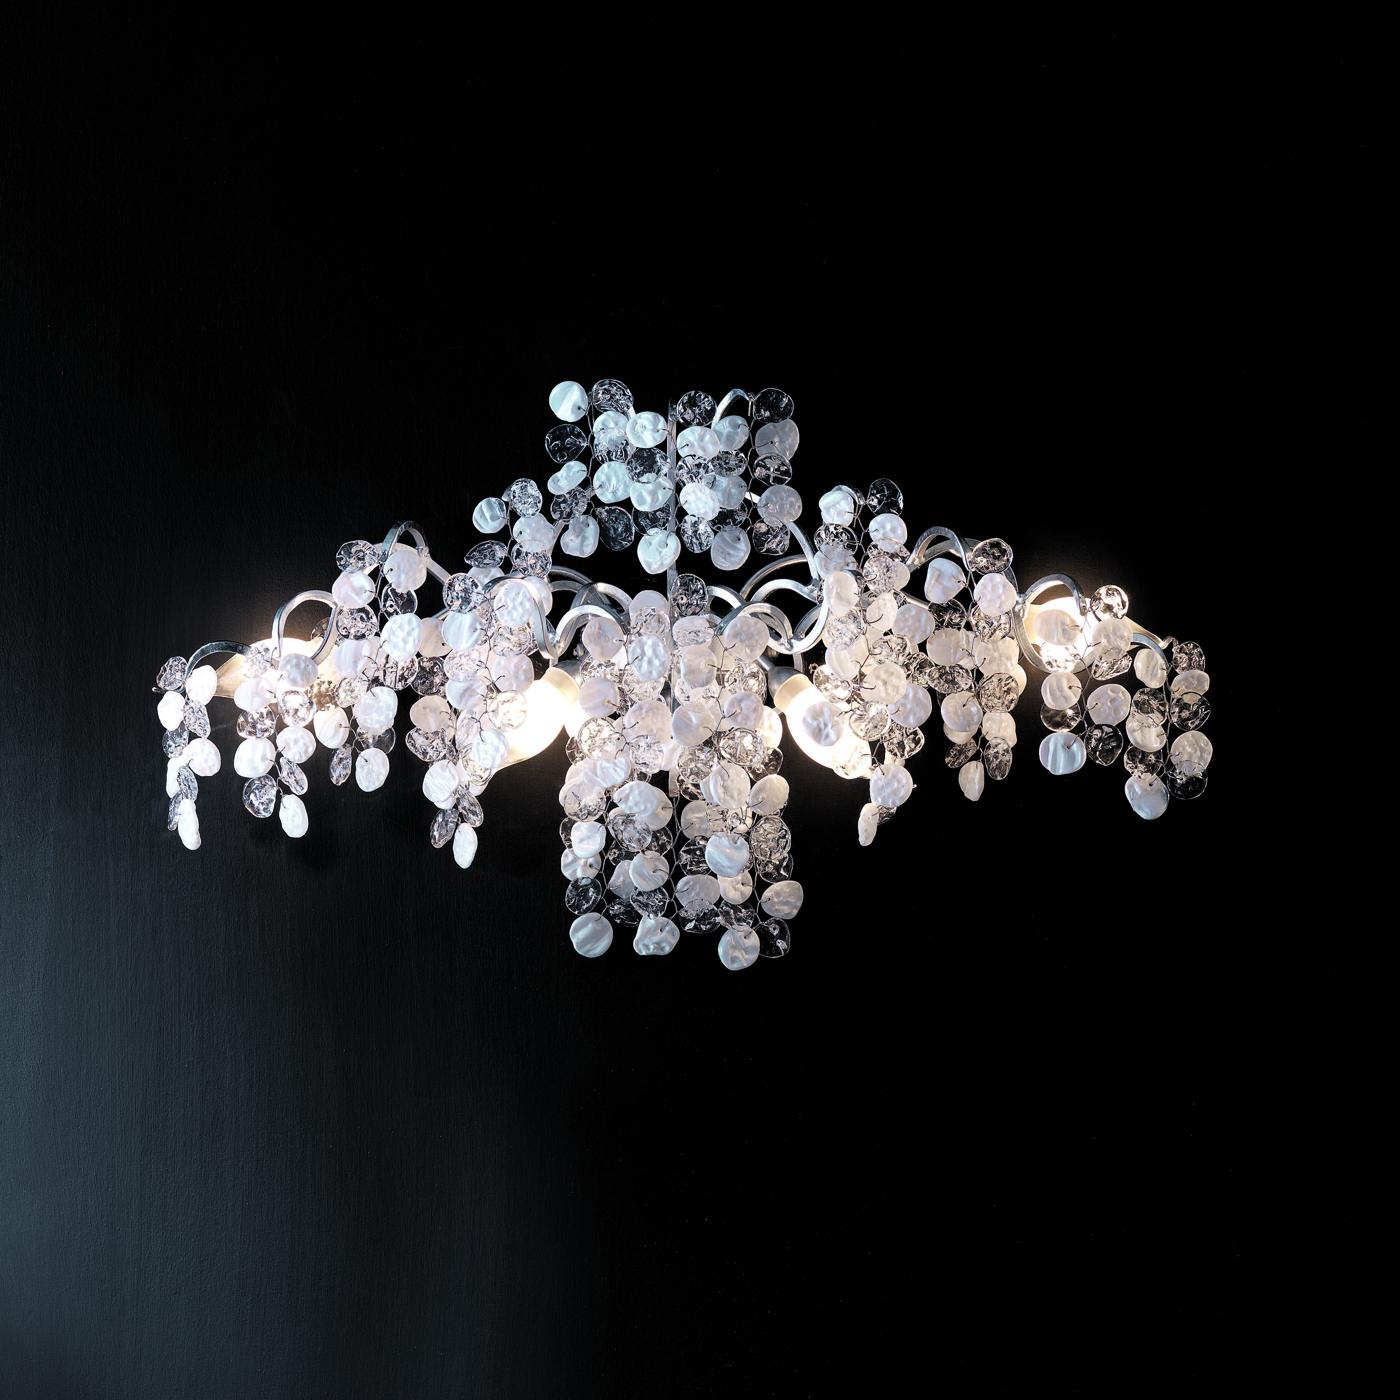 The resplendent allure characterizing this wall lamp is particularly evident in its splendid ensemble of hand-tied white and transparent glass petals creating a cascade that stunningly reflects the light cast by the four ES bulbs (G9 and max 33W